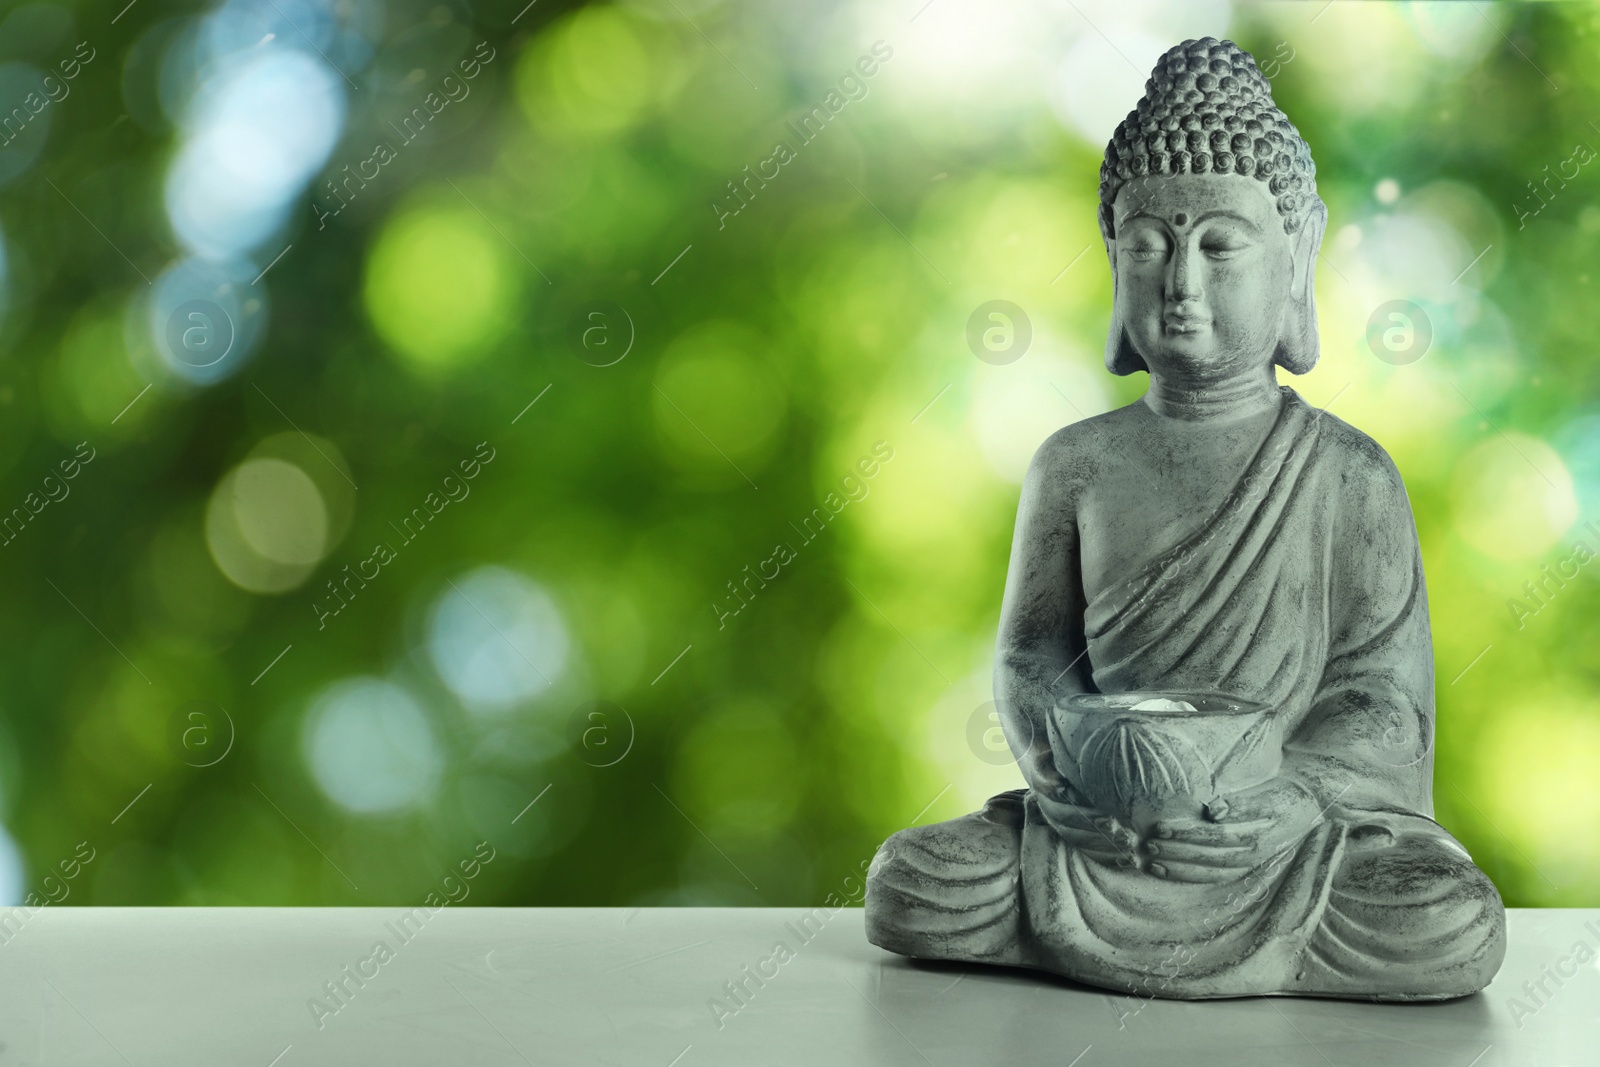 Image of Stone Buddha sculpture on table outdoors. Space for text